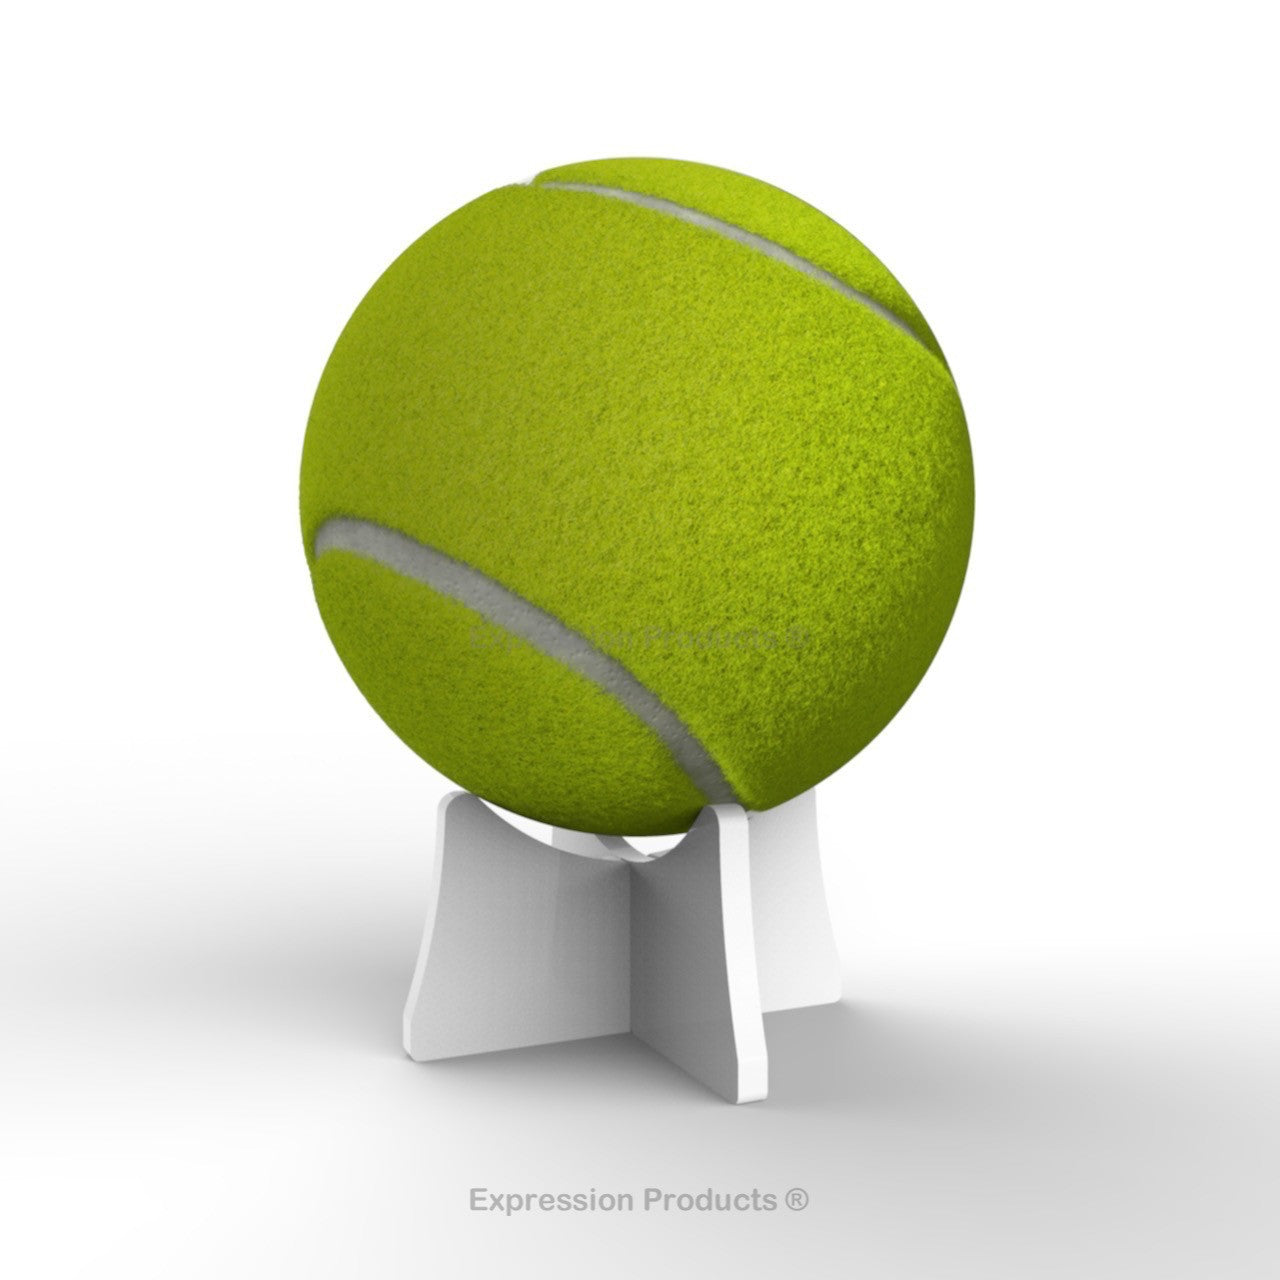 Tennis Ball Display Stand - Expression Products Ltd